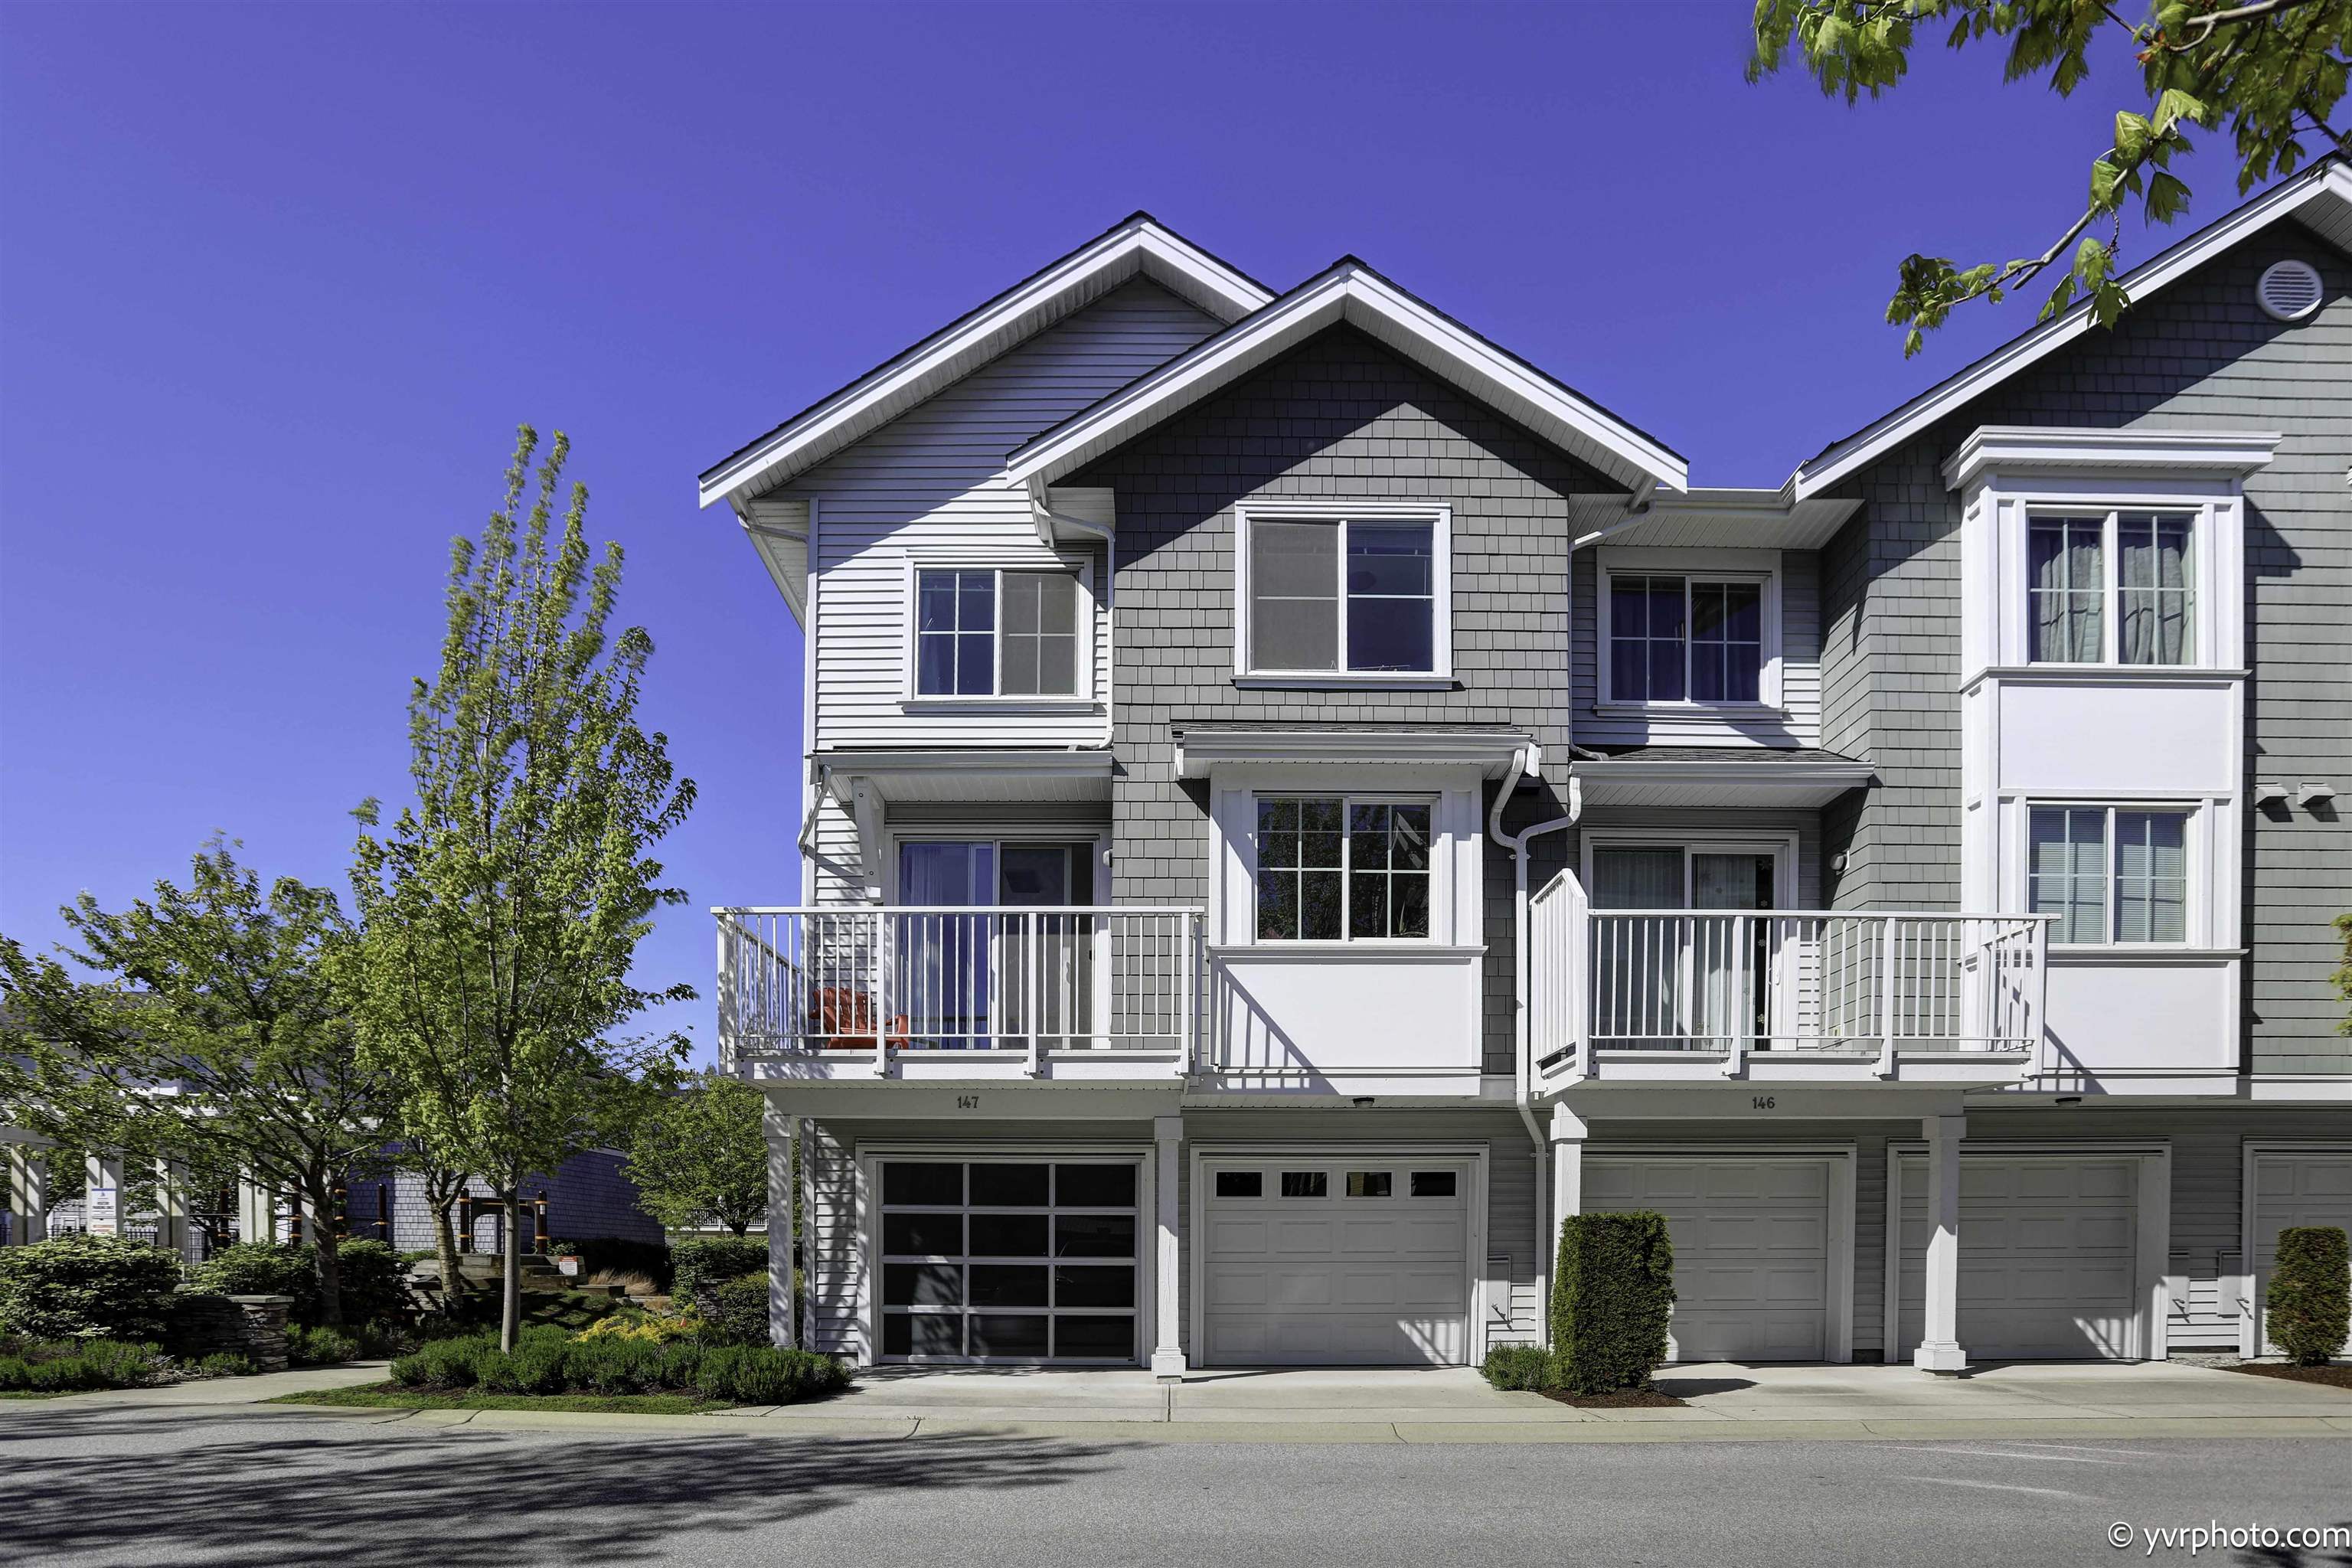 Listing image of 147 5550 ADMIRAL WAY